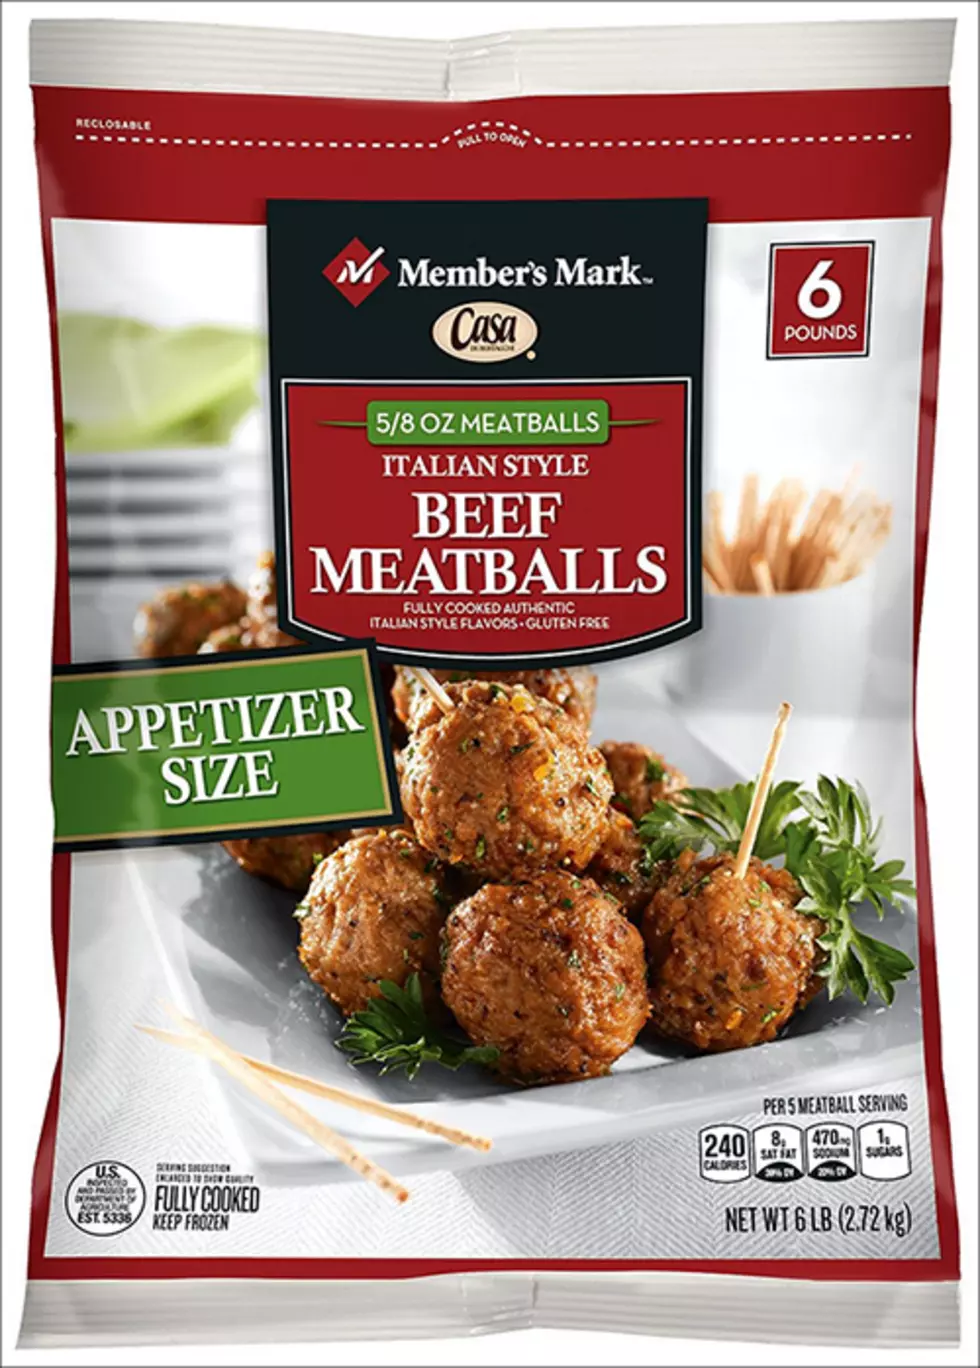 Frozen Meatballs Sold In Louisiana Recalled Due To Listeria 